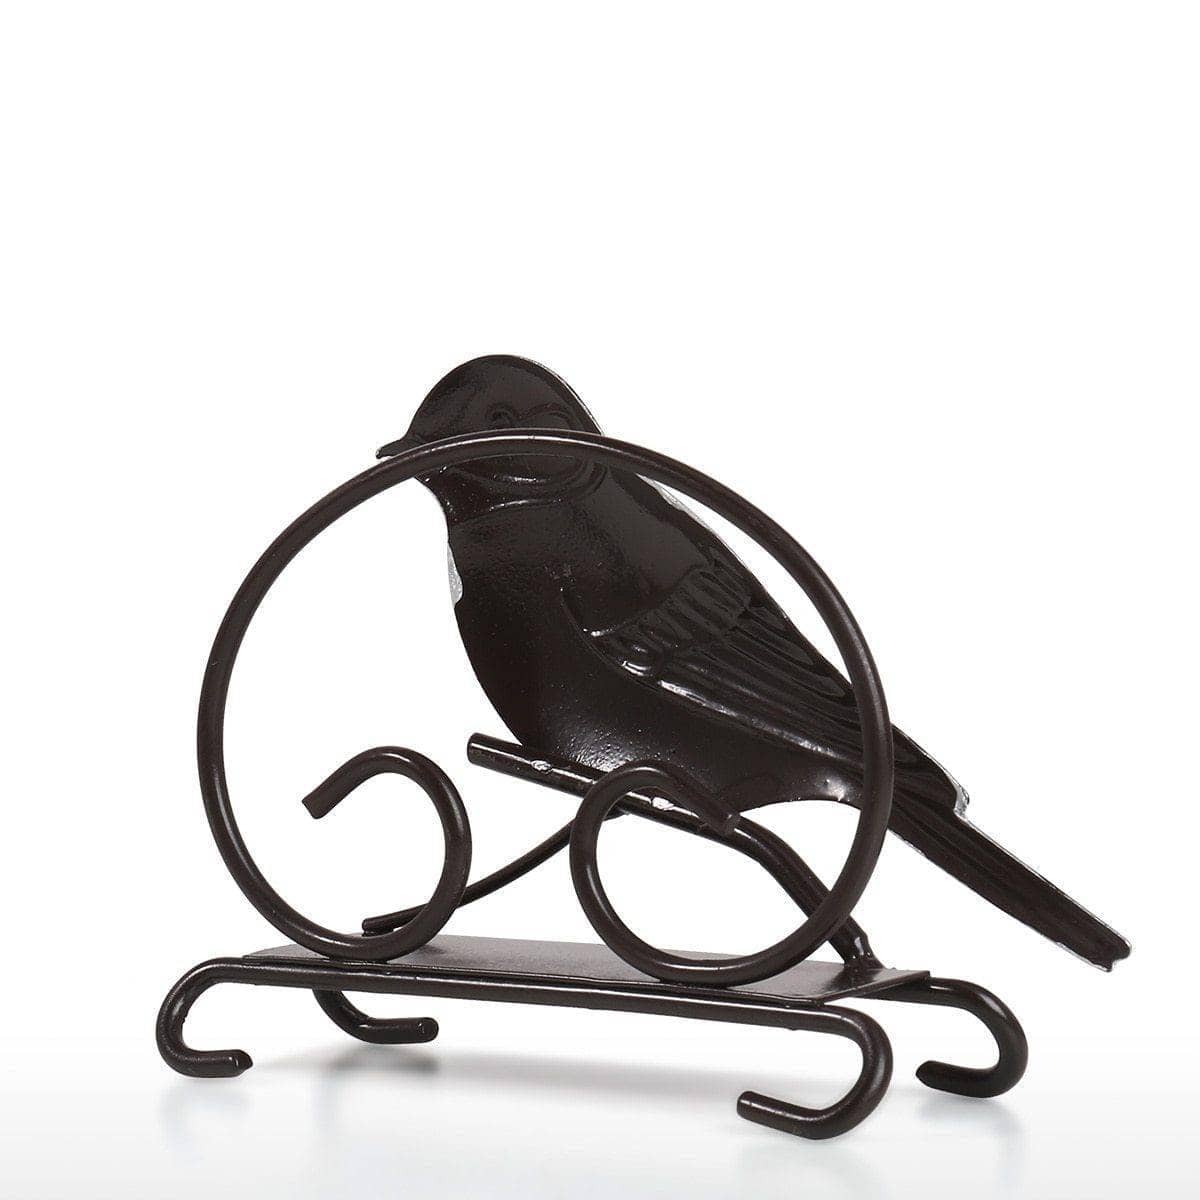 Bird Tissue Paper Napkin Holder - Cute and Practical Table Decor